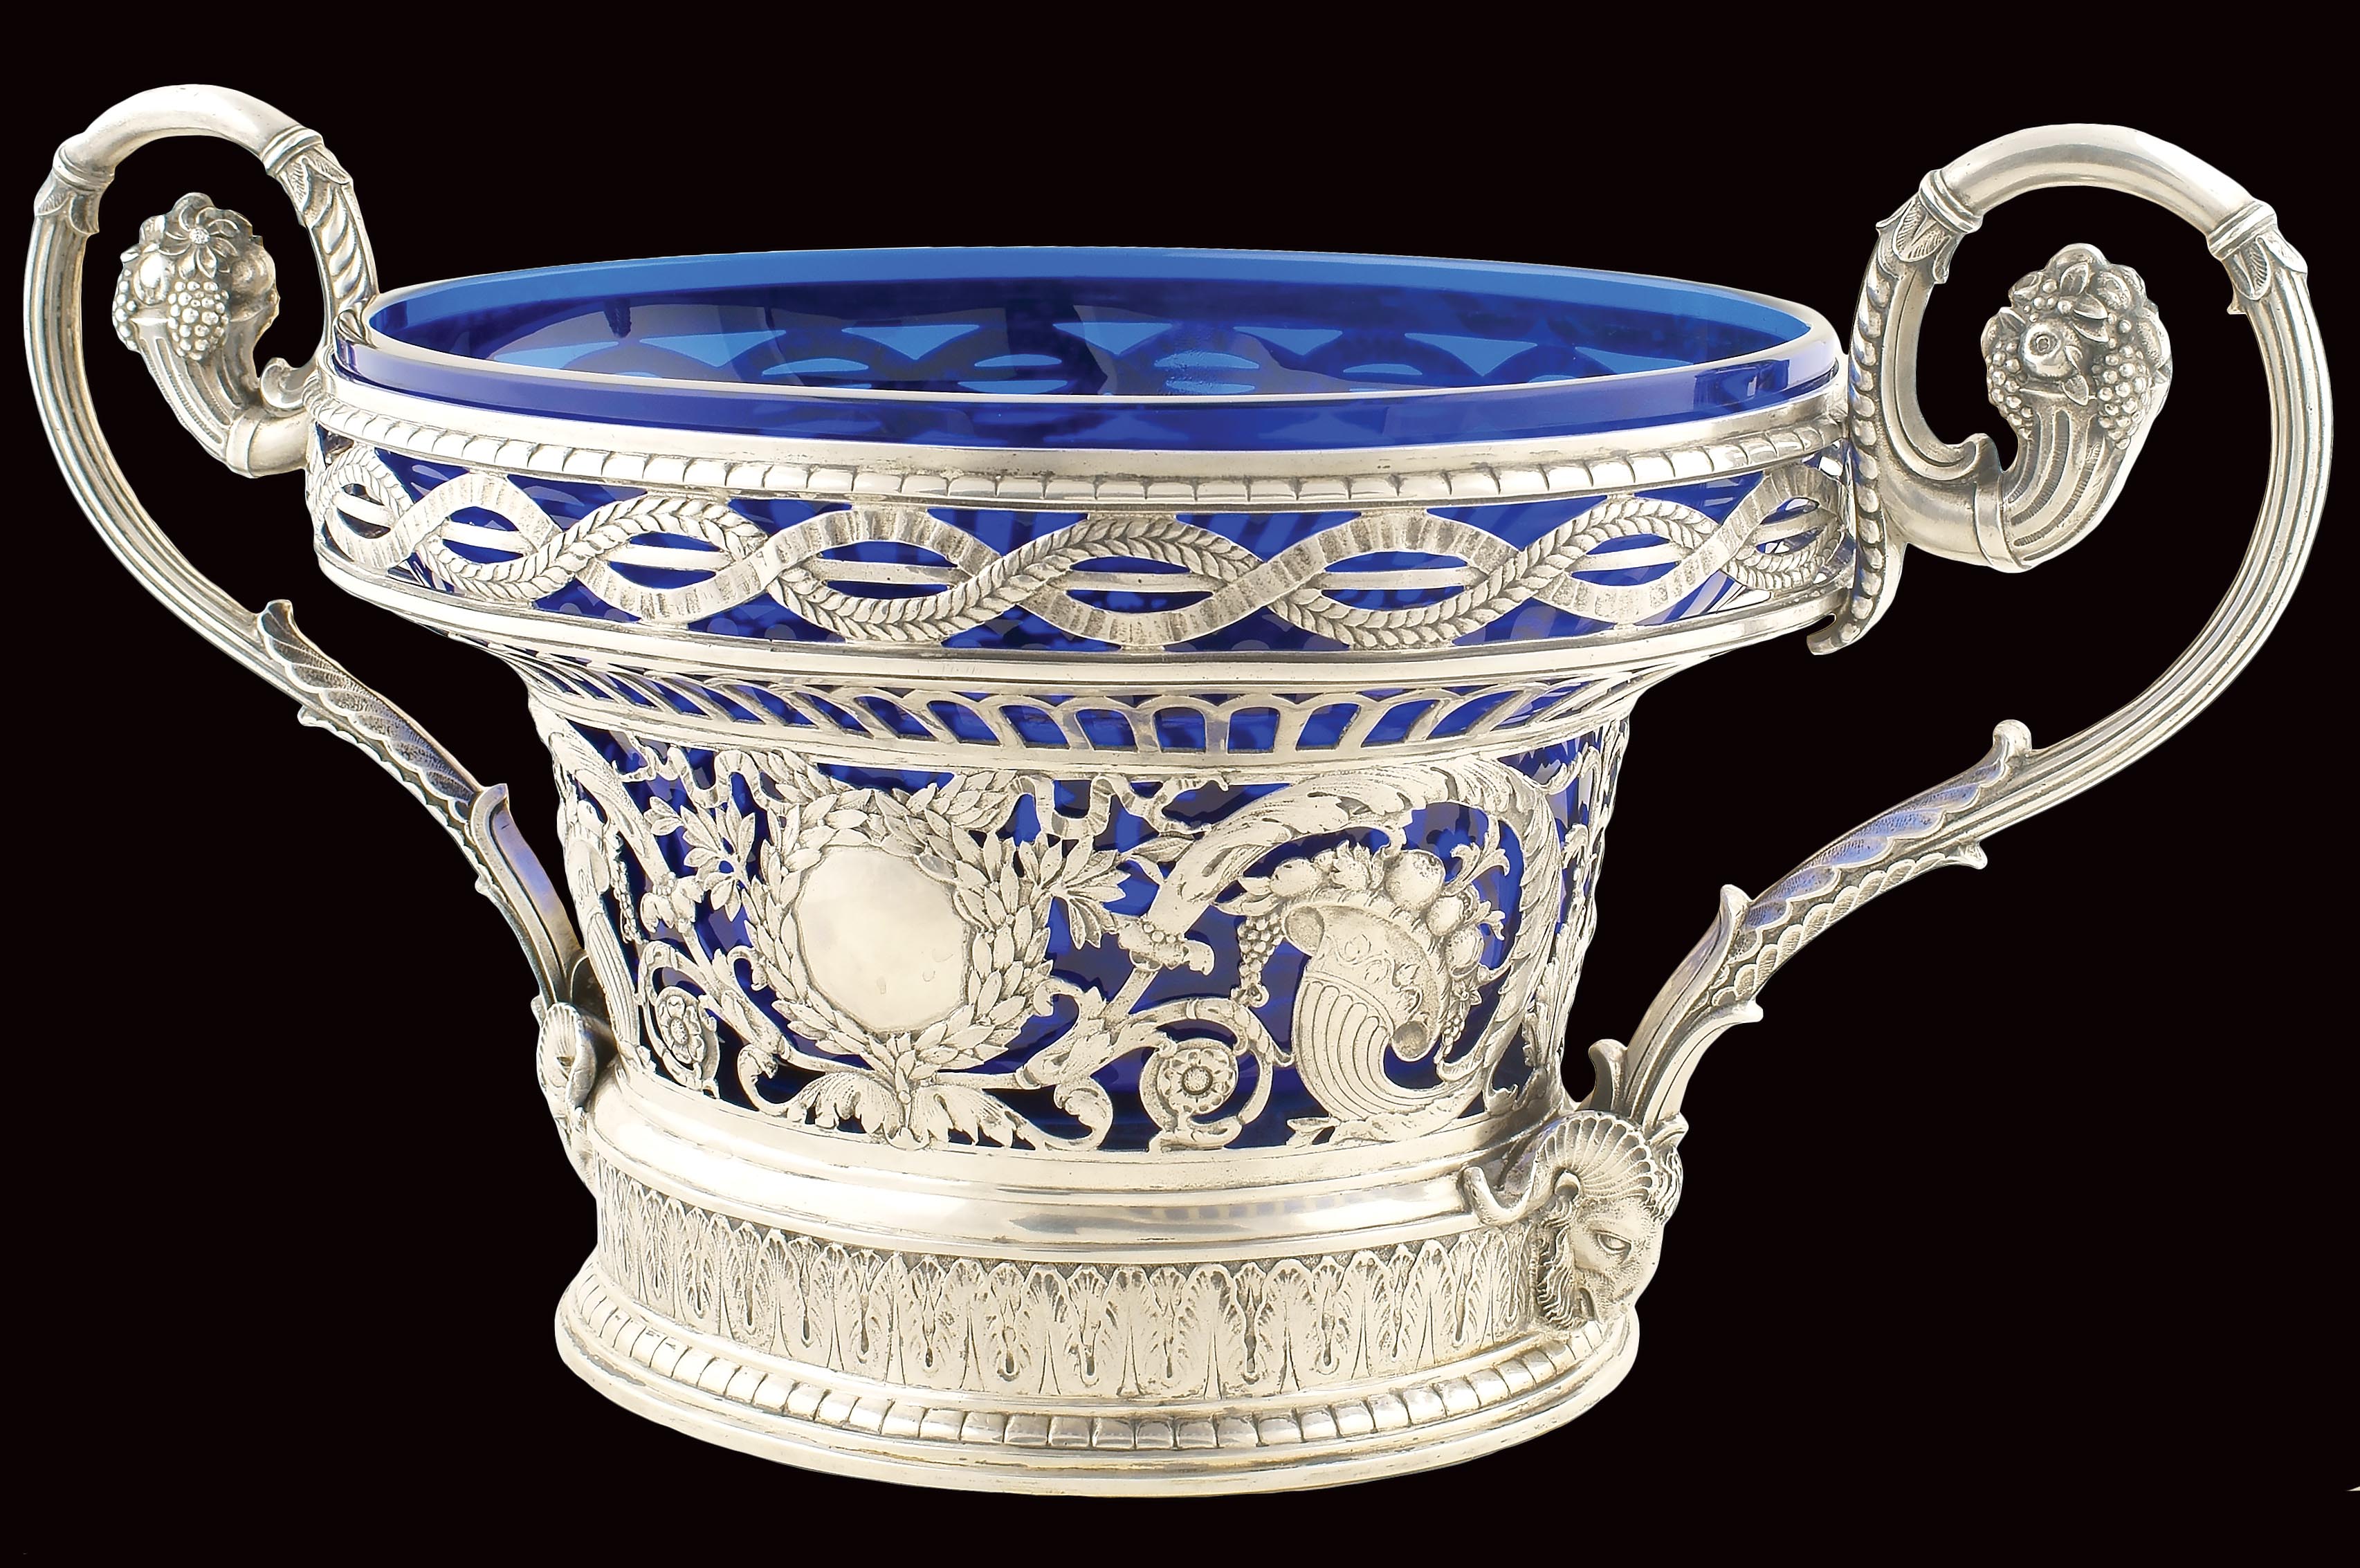 A German silver tray Silversmith Carl Schnauffer, repoussé and chasing decorations, blue glass